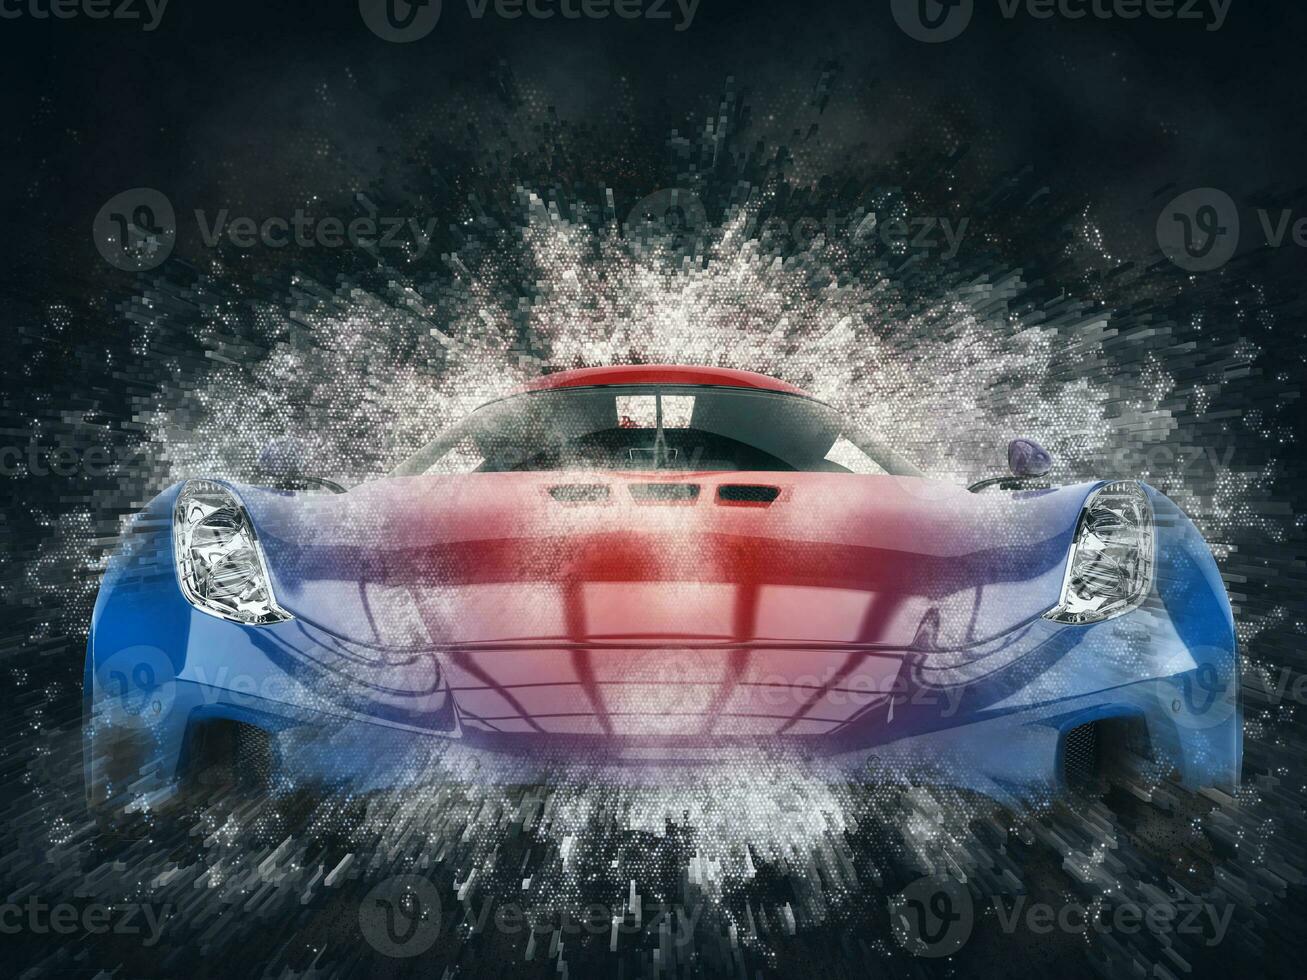 Amazing blue and red super car - 3D pixel grid illustration photo